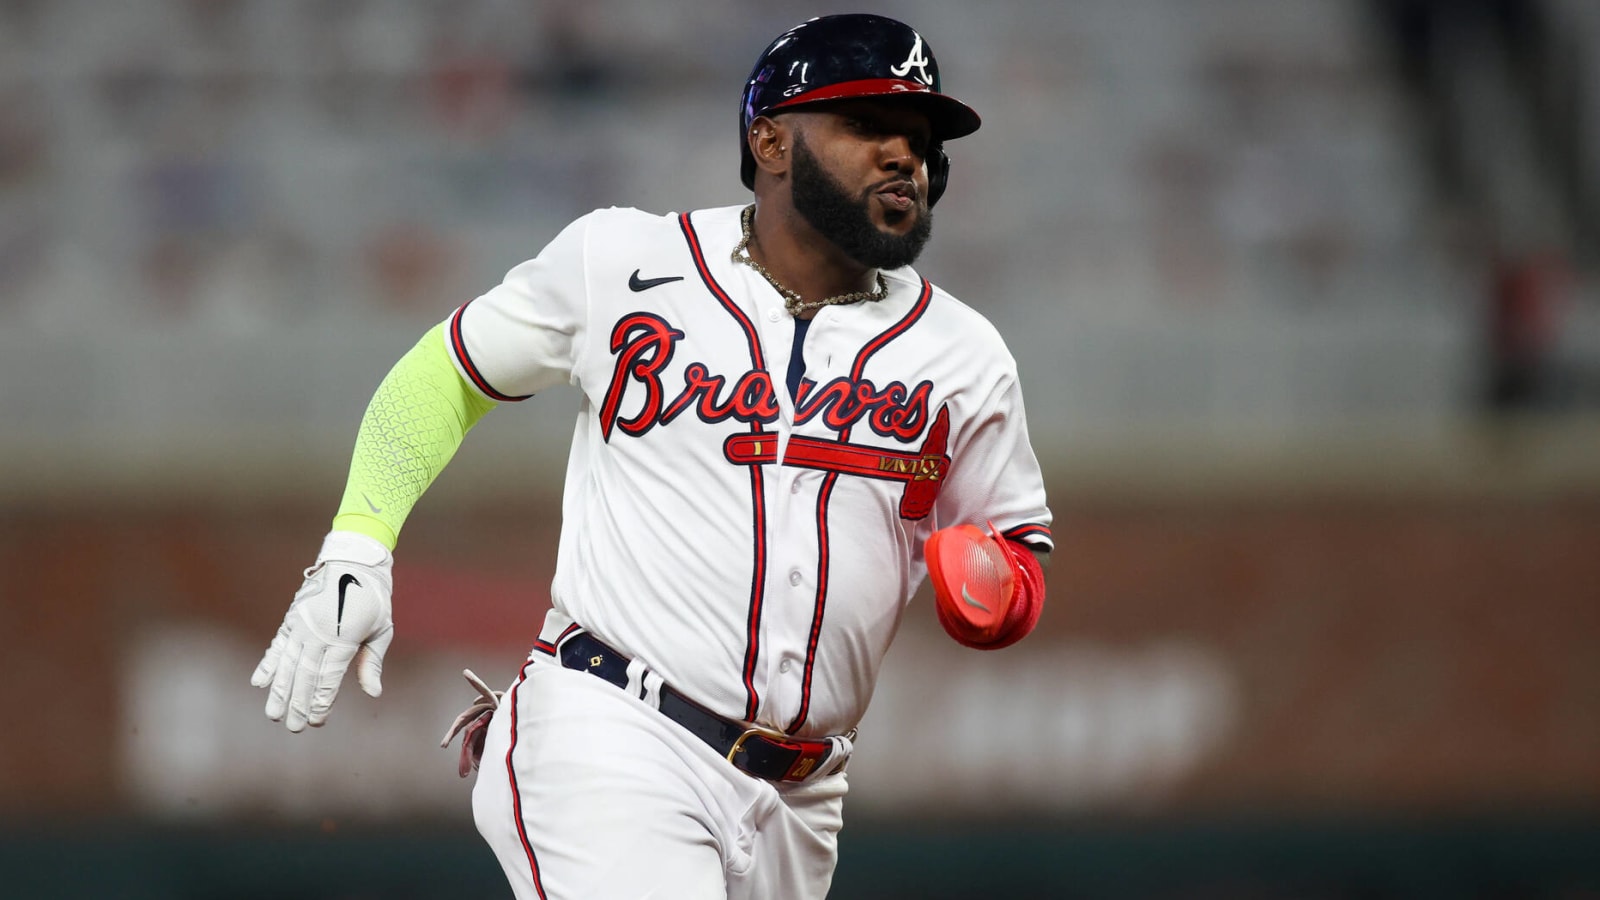 Why haven’t the Braves cut ties with Marcell Ozuna yet?